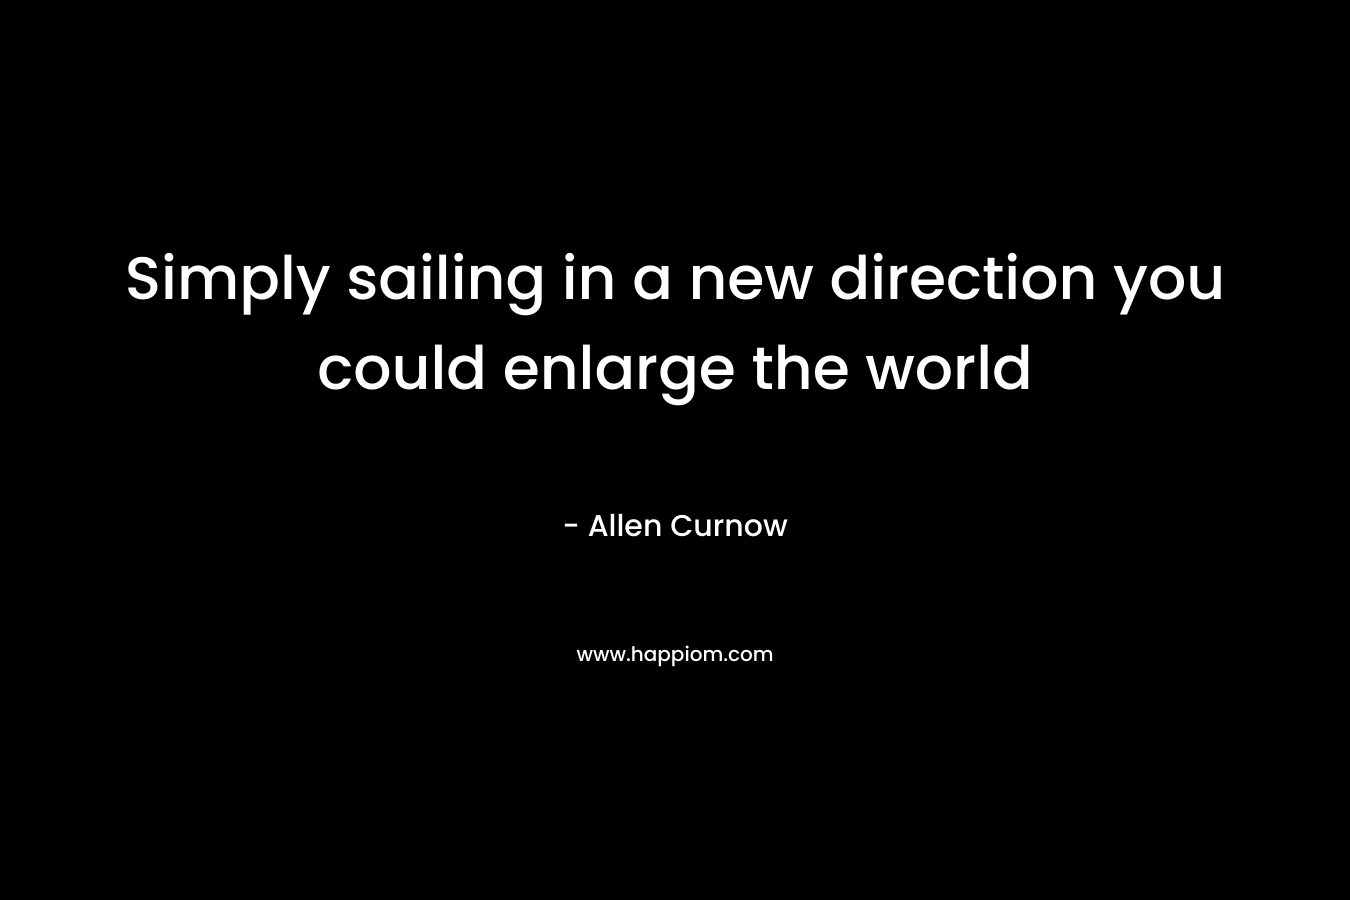 Simply sailing in a new direction you could enlarge the world – Allen Curnow